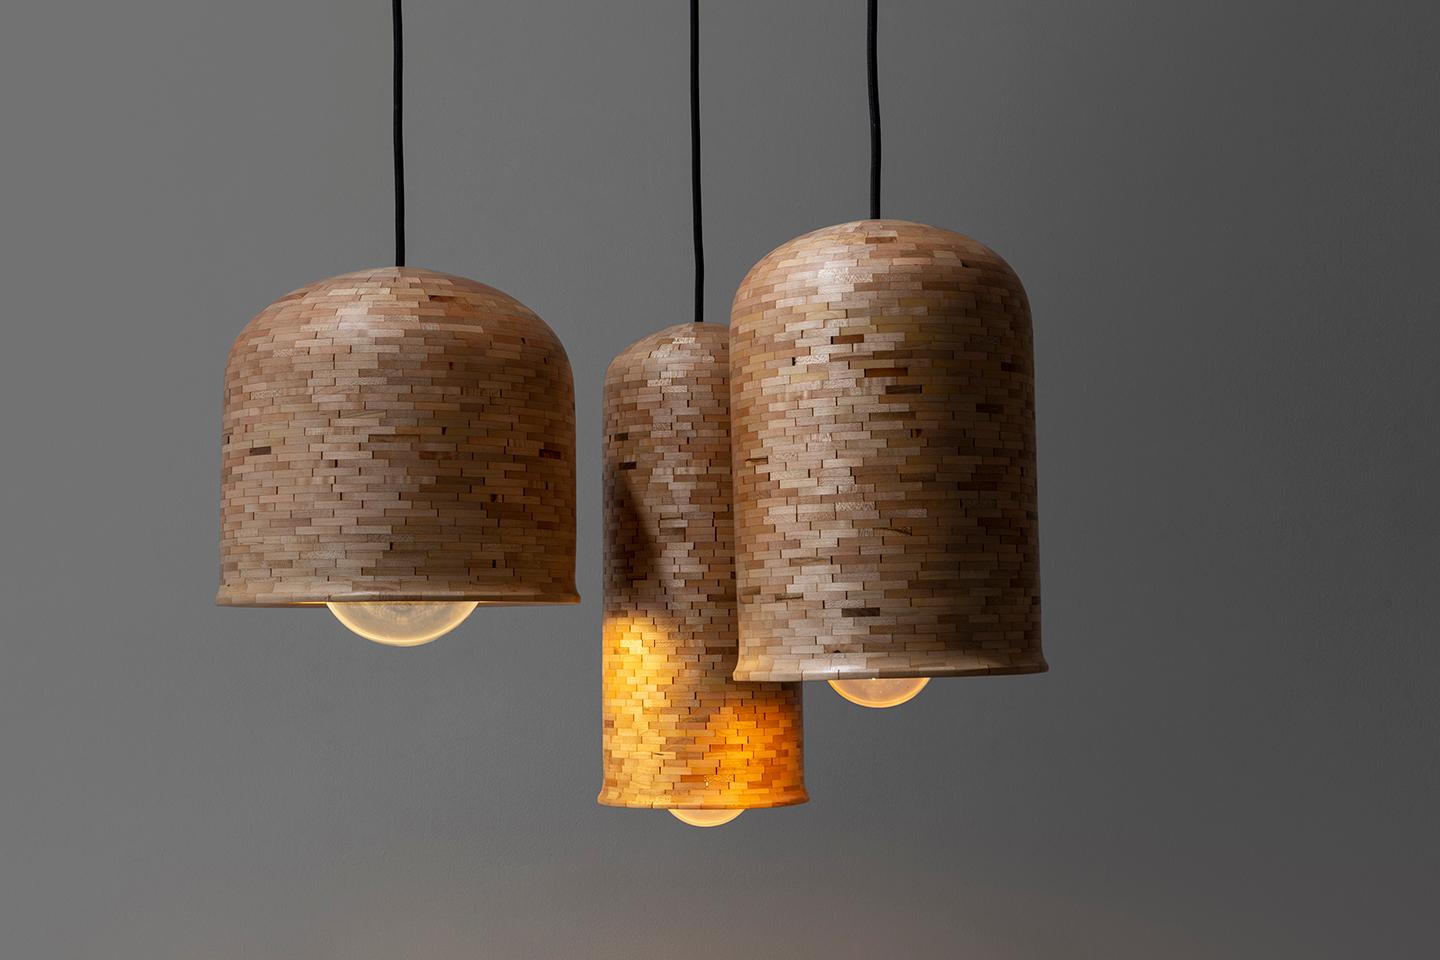 Wooden STACKED Illuminated Hanging Bell-Shaped Sculpture, 